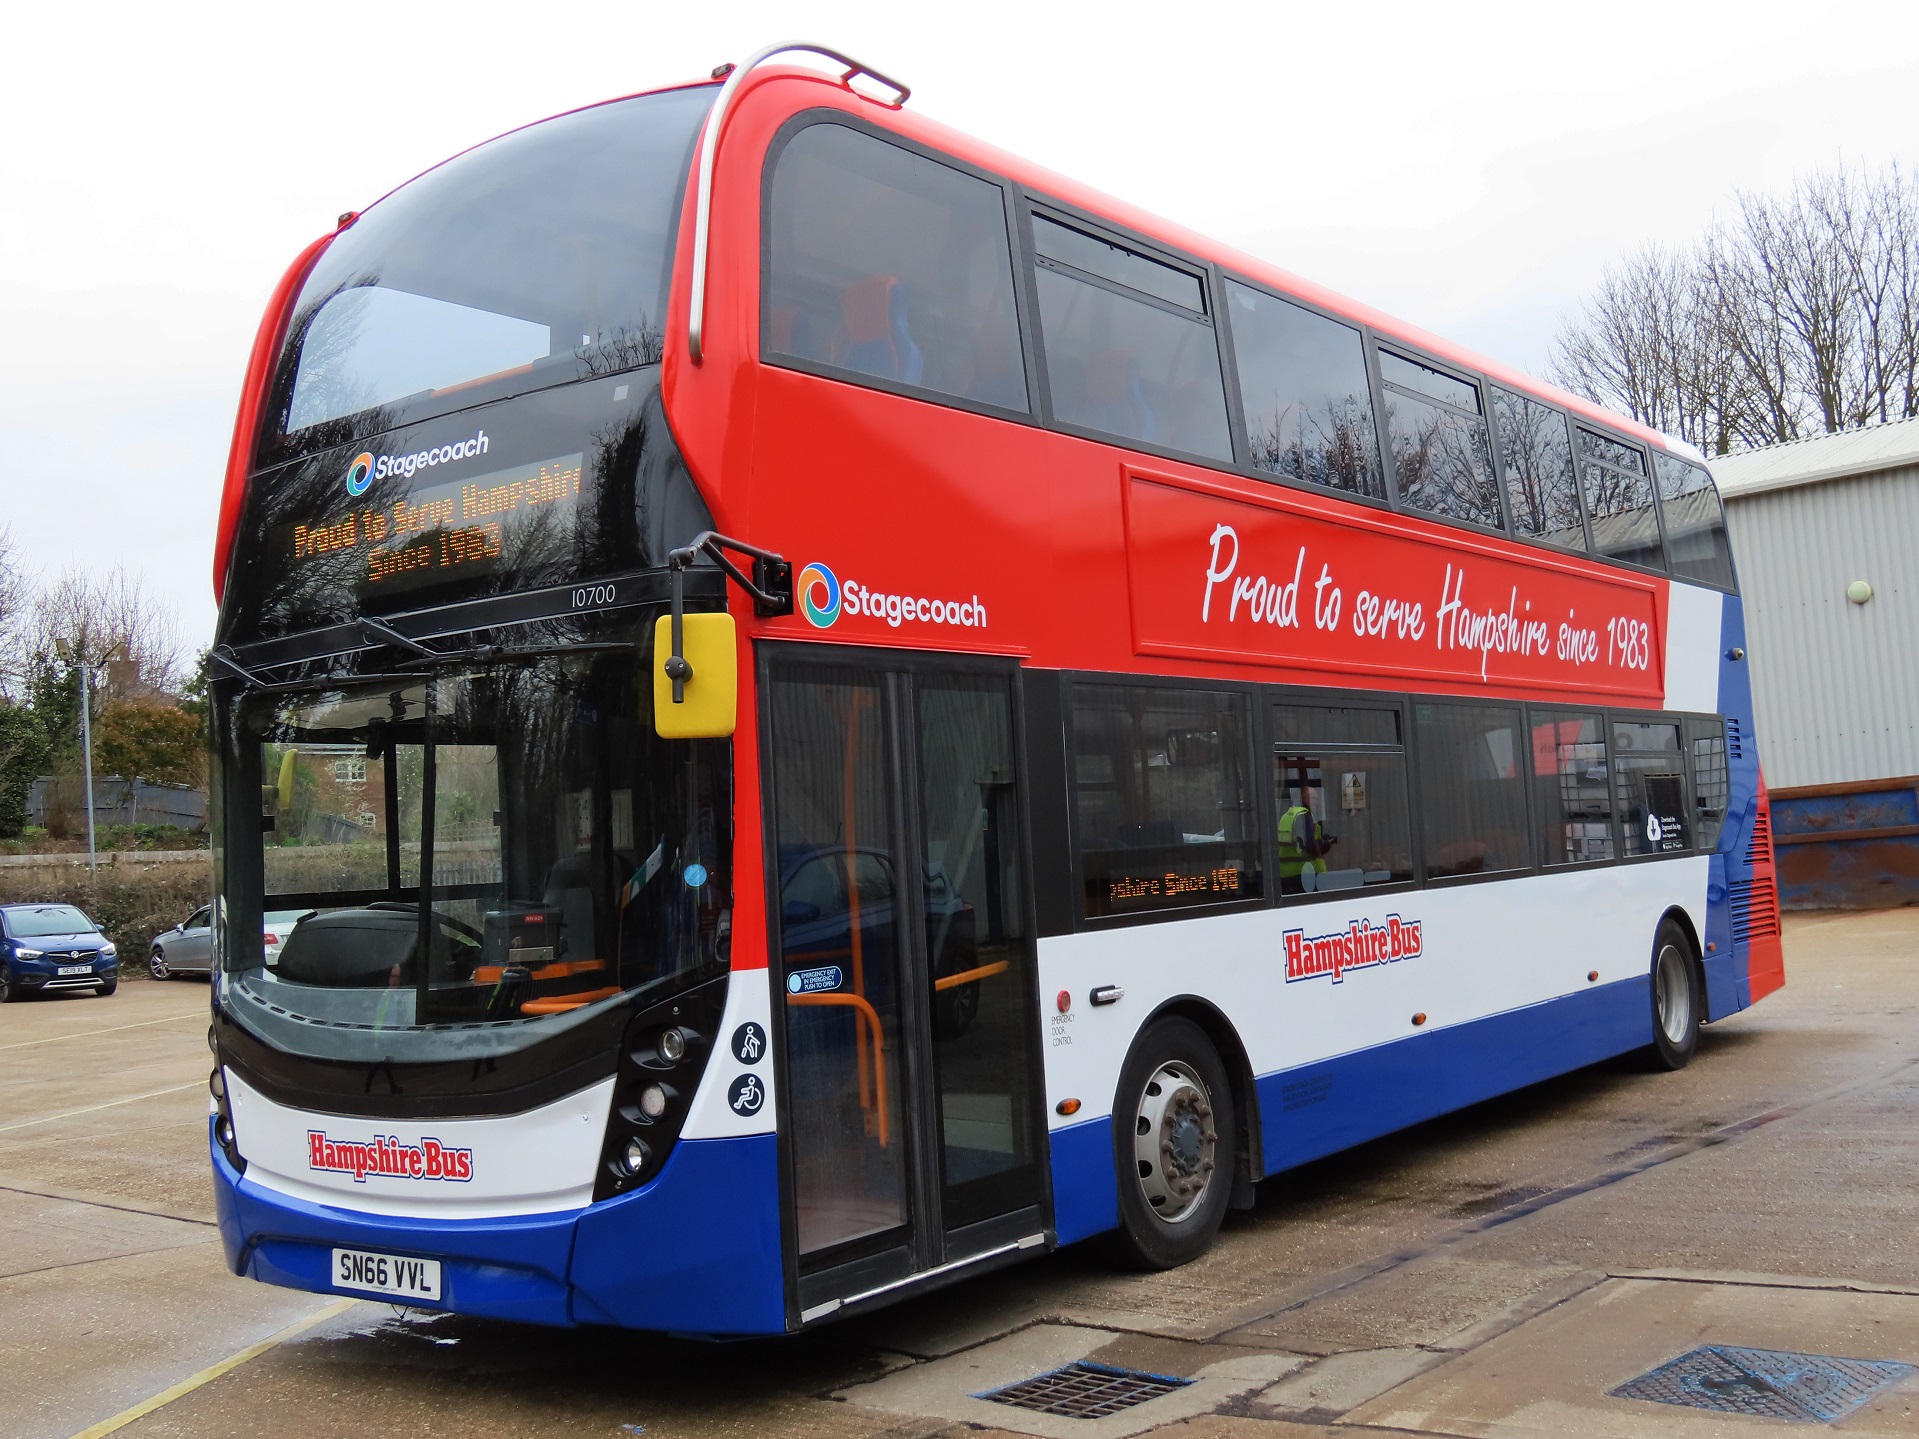 Stagecoach South Enviro400 in Hampshire Bus livery